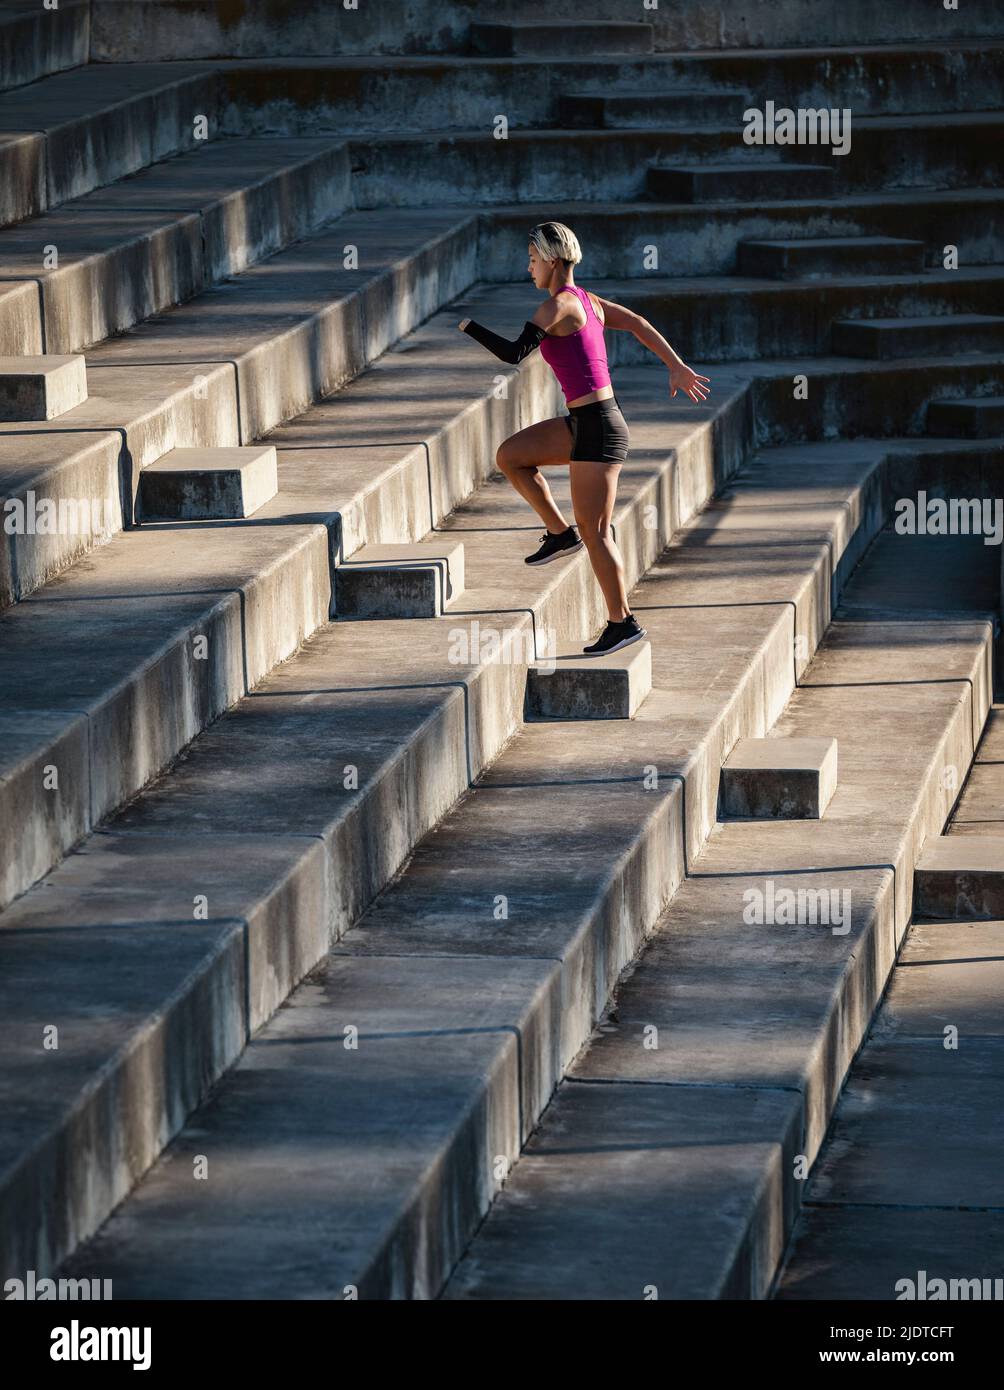 Athletic woman with amputated hand running up steps Stock Photo